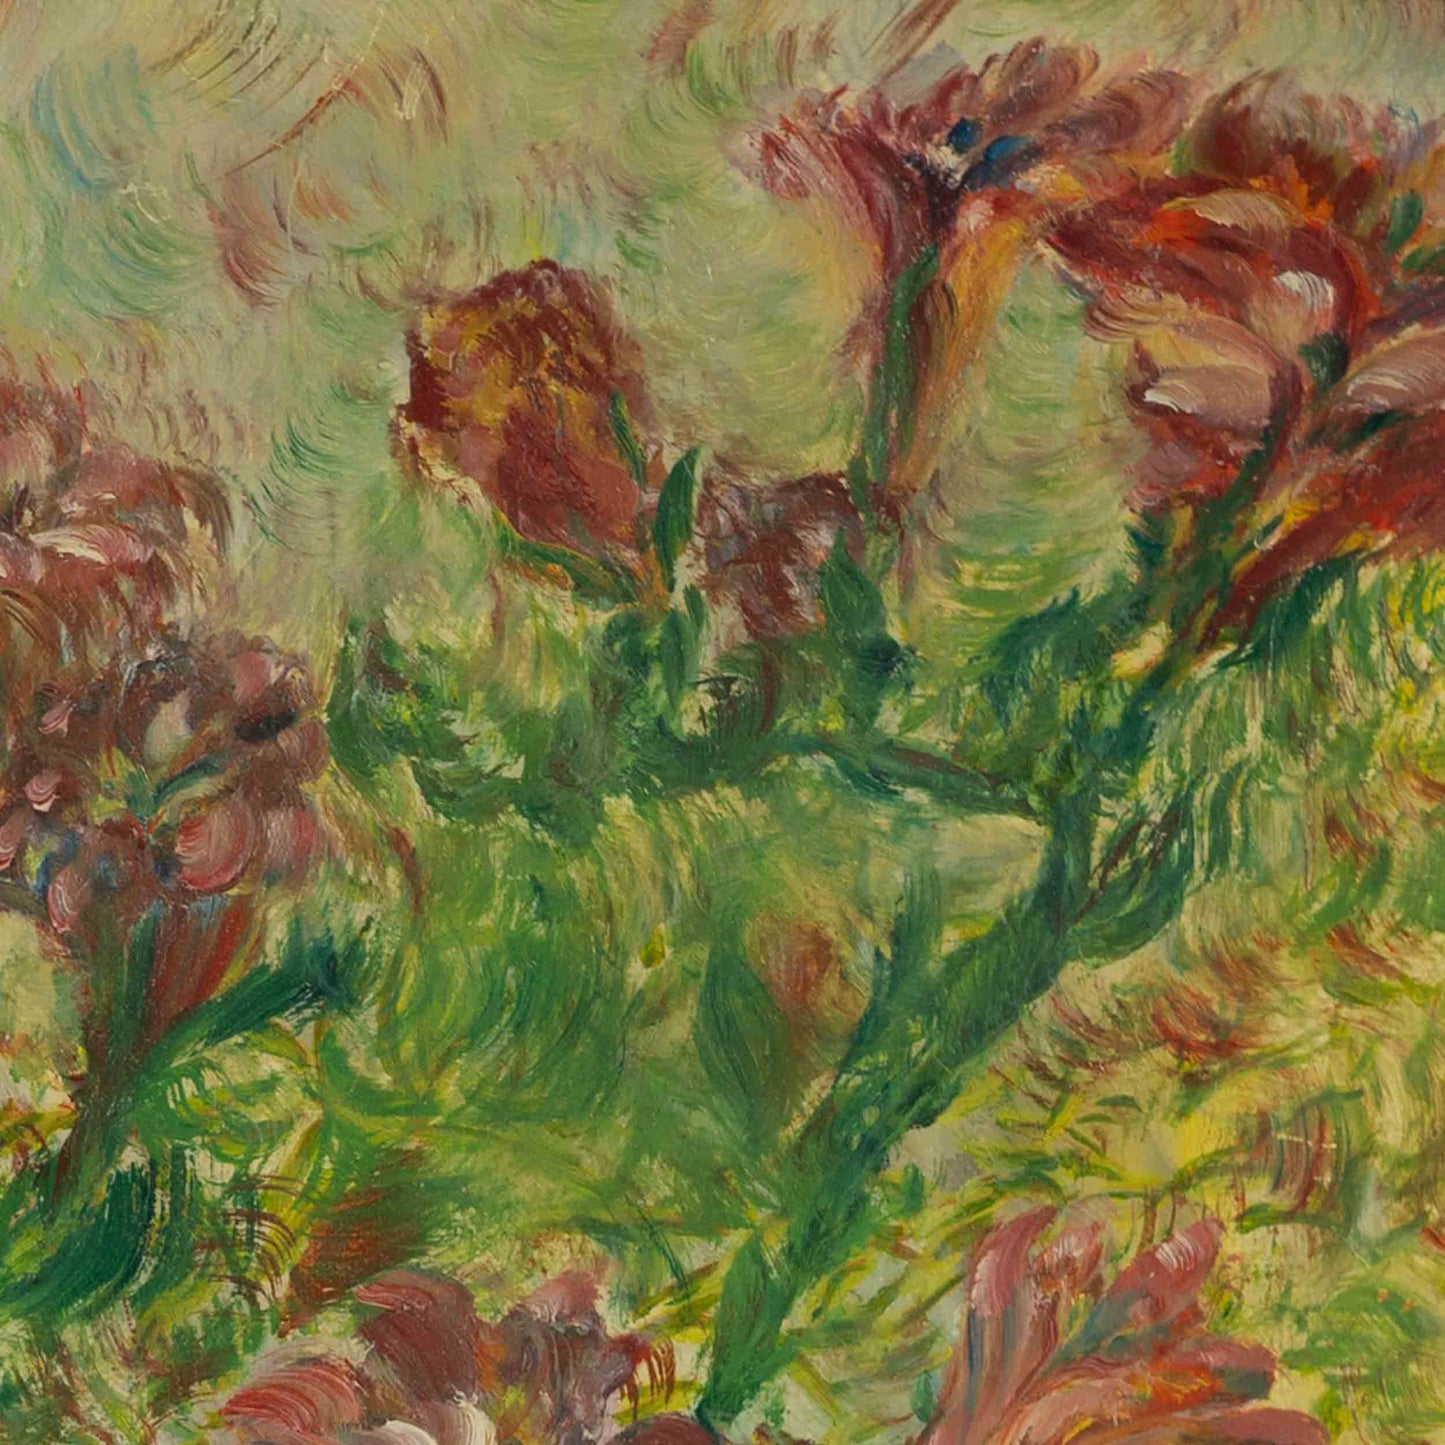 Vintage Floral Painting #2, New York,  20th C.